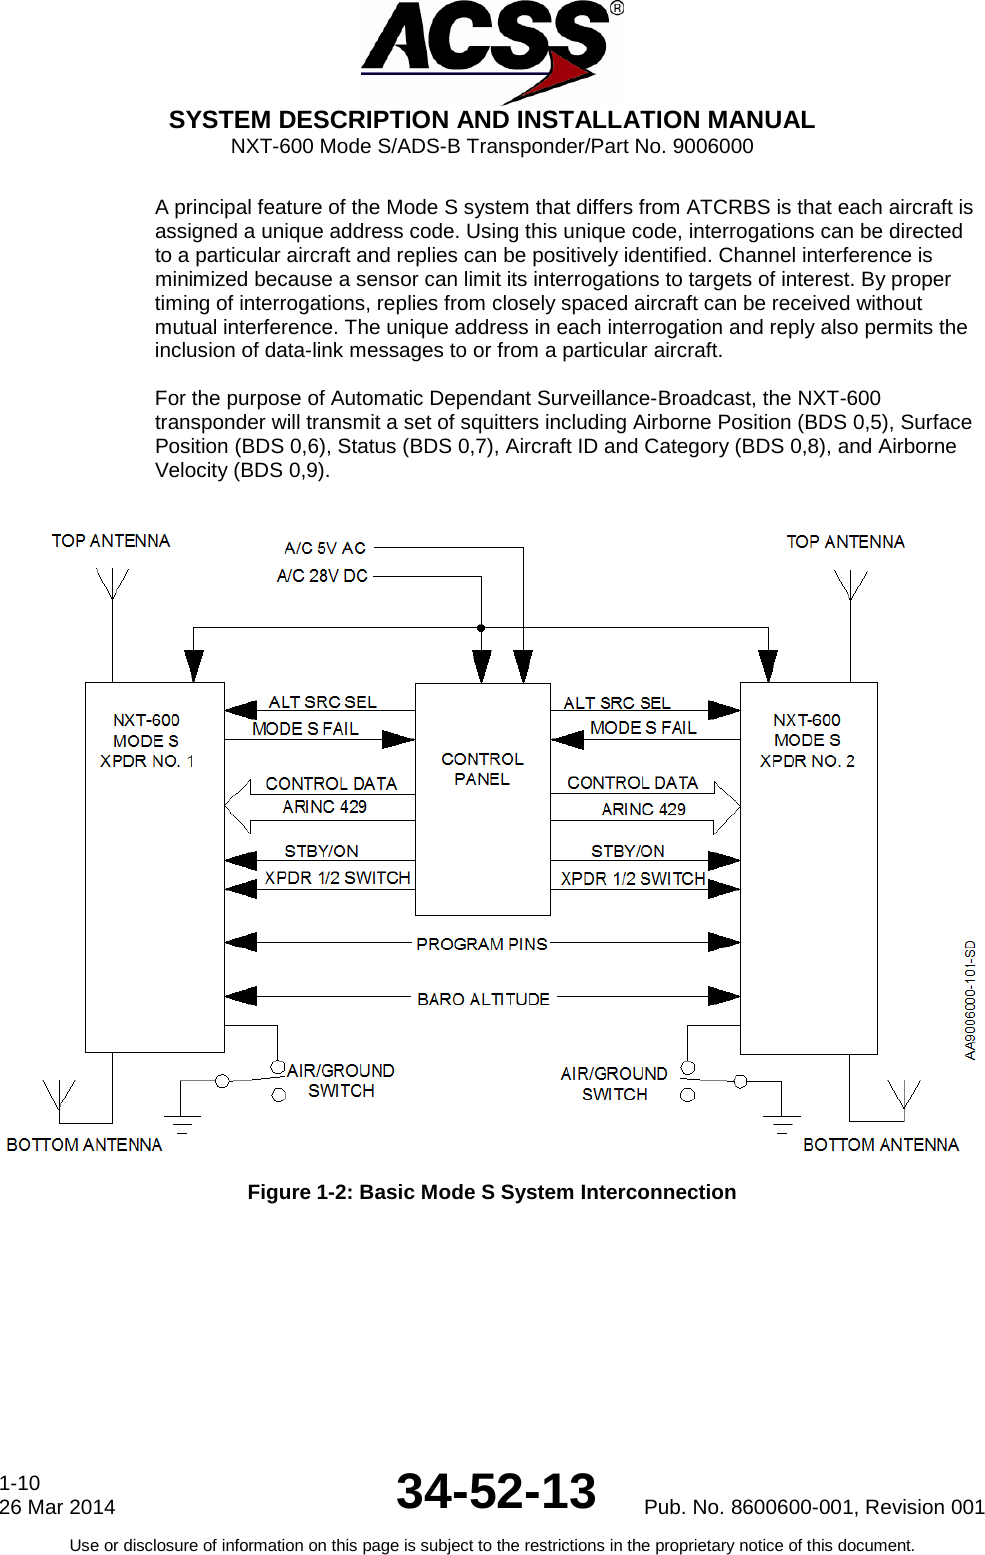  SYSTEM DESCRIPTION AND INSTALLATION MANUAL NXT-600 Mode S/ADS-B Transponder/Part No. 9006000  A principal feature of the Mode S system that differs from ATCRBS is that each aircraft is assigned a unique address code. Using this unique code, interrogations can be directed to a particular aircraft and replies can be positively identified. Channel interference is minimized because a sensor can limit its interrogations to targets of interest. By proper timing of interrogations, replies from closely spaced aircraft can be received without mutual interference. The unique address in each interrogation and reply also permits the inclusion of data-link messages to or from a particular aircraft.   For the purpose of Automatic Dependant Surveillance-Broadcast, the NXT-600 transponder will transmit a set of squitters including Airborne Position (BDS 0,5), Surface Position (BDS 0,6), Status (BDS 0,7), Aircraft ID and Category (BDS 0,8), and Airborne Velocity (BDS 0,9).     Figure 1-2: Basic Mode S System Interconnection 1-10 26 Mar 2014 34-52-13 Pub. No. 8600600-001, Revision 001 Use or disclosure of information on this page is subject to the restrictions in the proprietary notice of this document.  